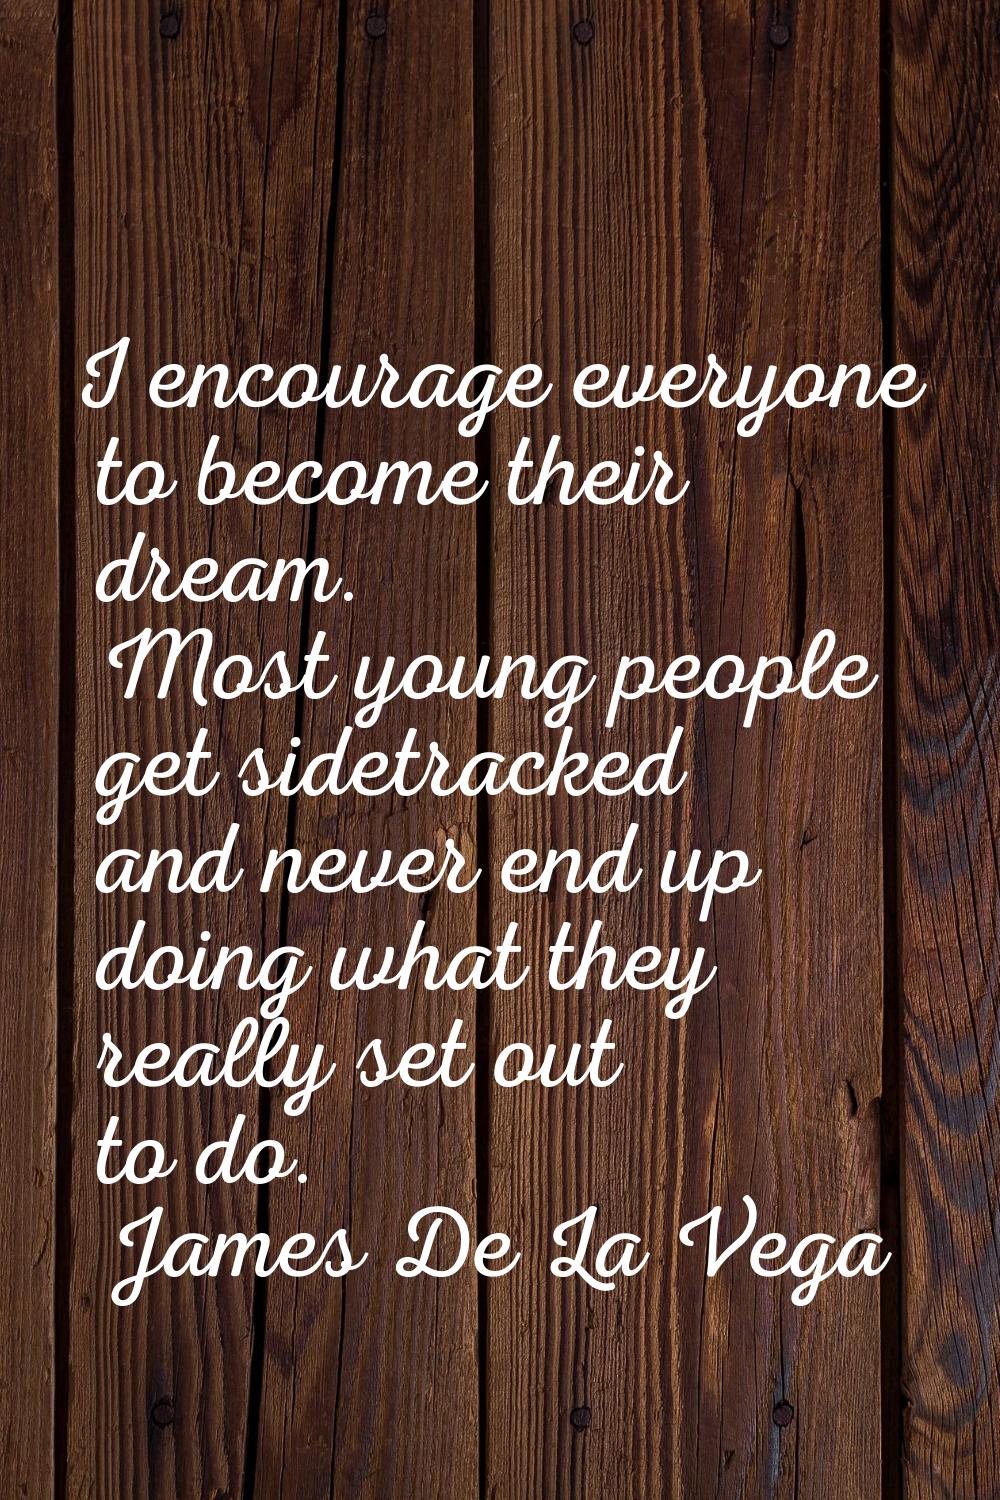 I encourage everyone to become their dream. Most young people get sidetracked and never end up doin